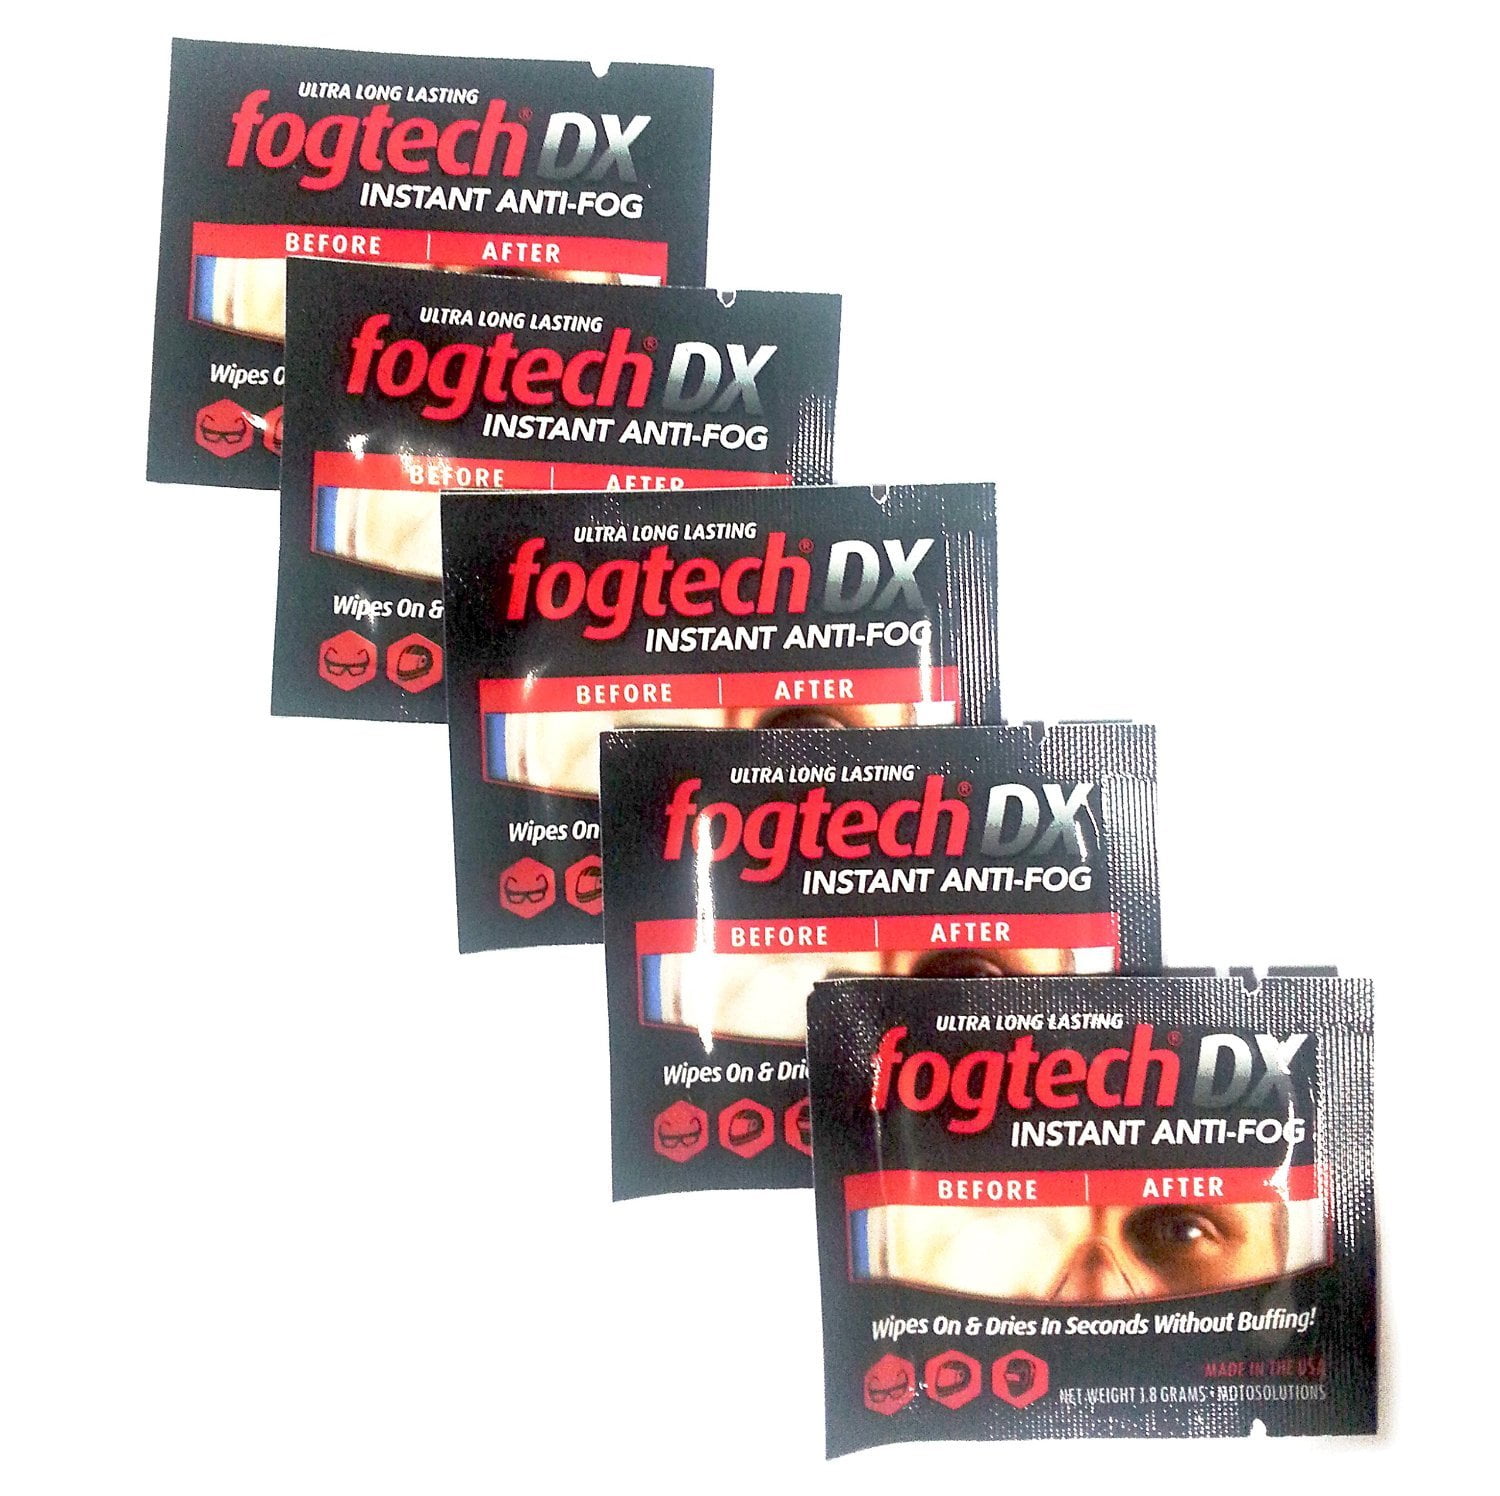 Prevent on Sunglasses Motorcycle FogTech DX Anti Fog Wipes Pack of 